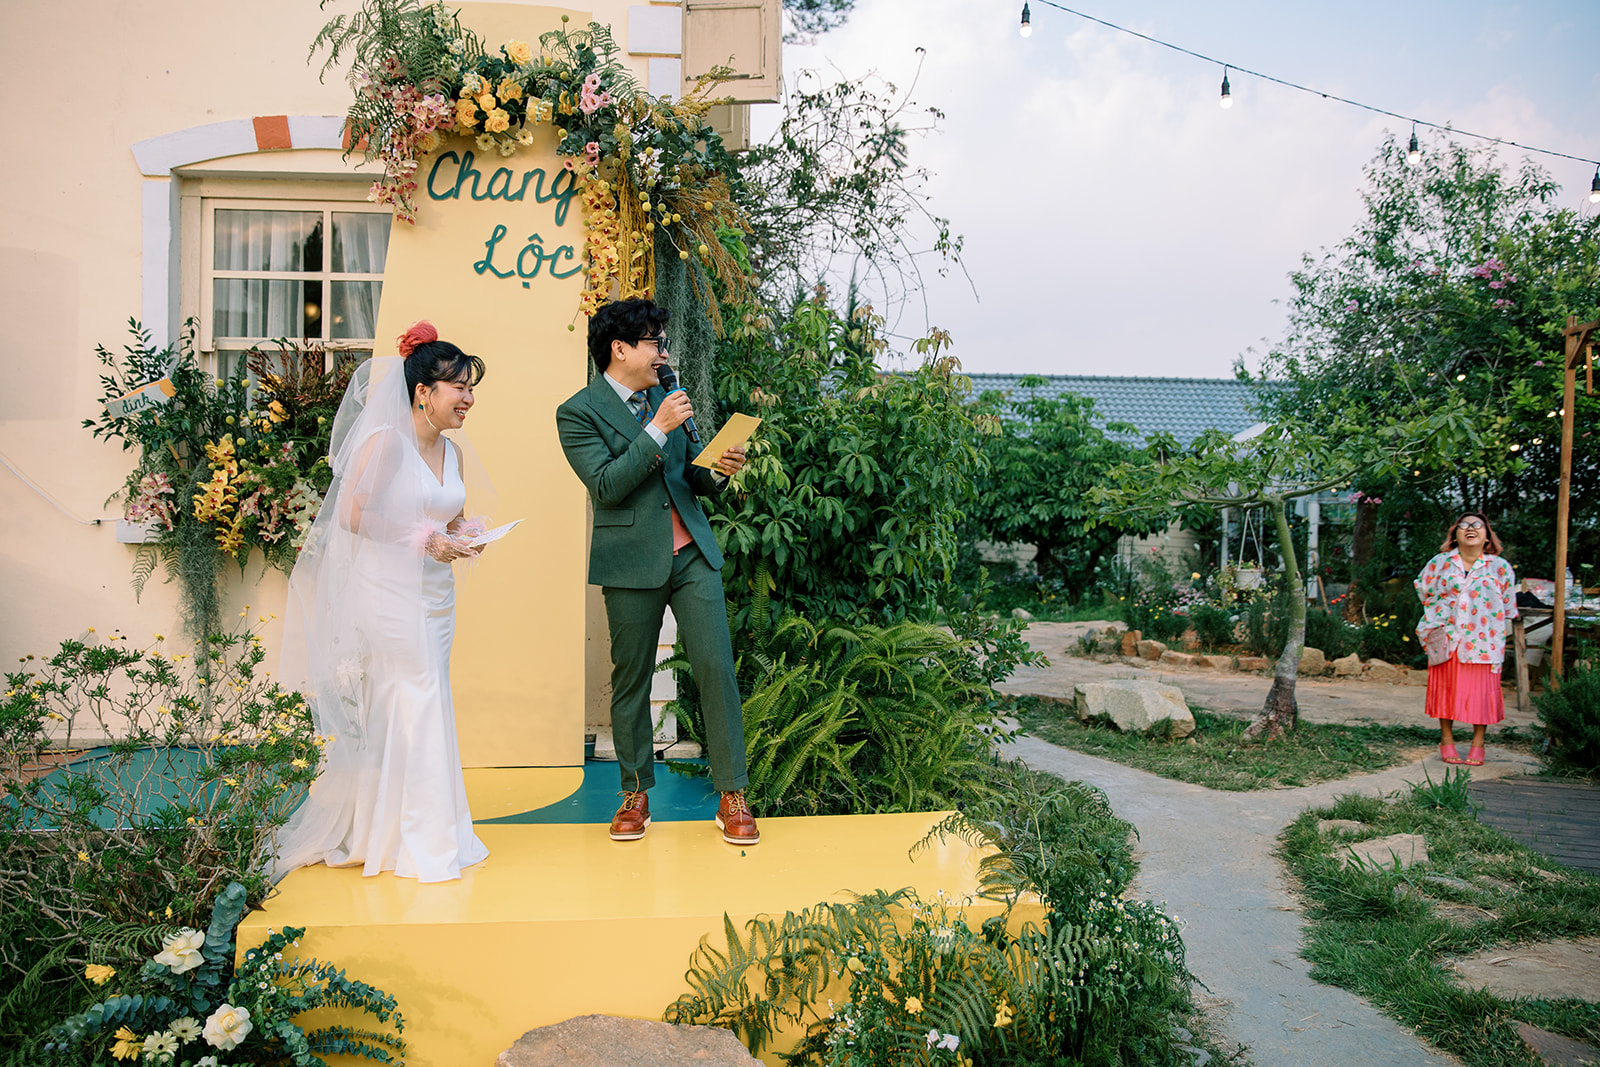 vow exchange in a micro intimate wedding in Dalat